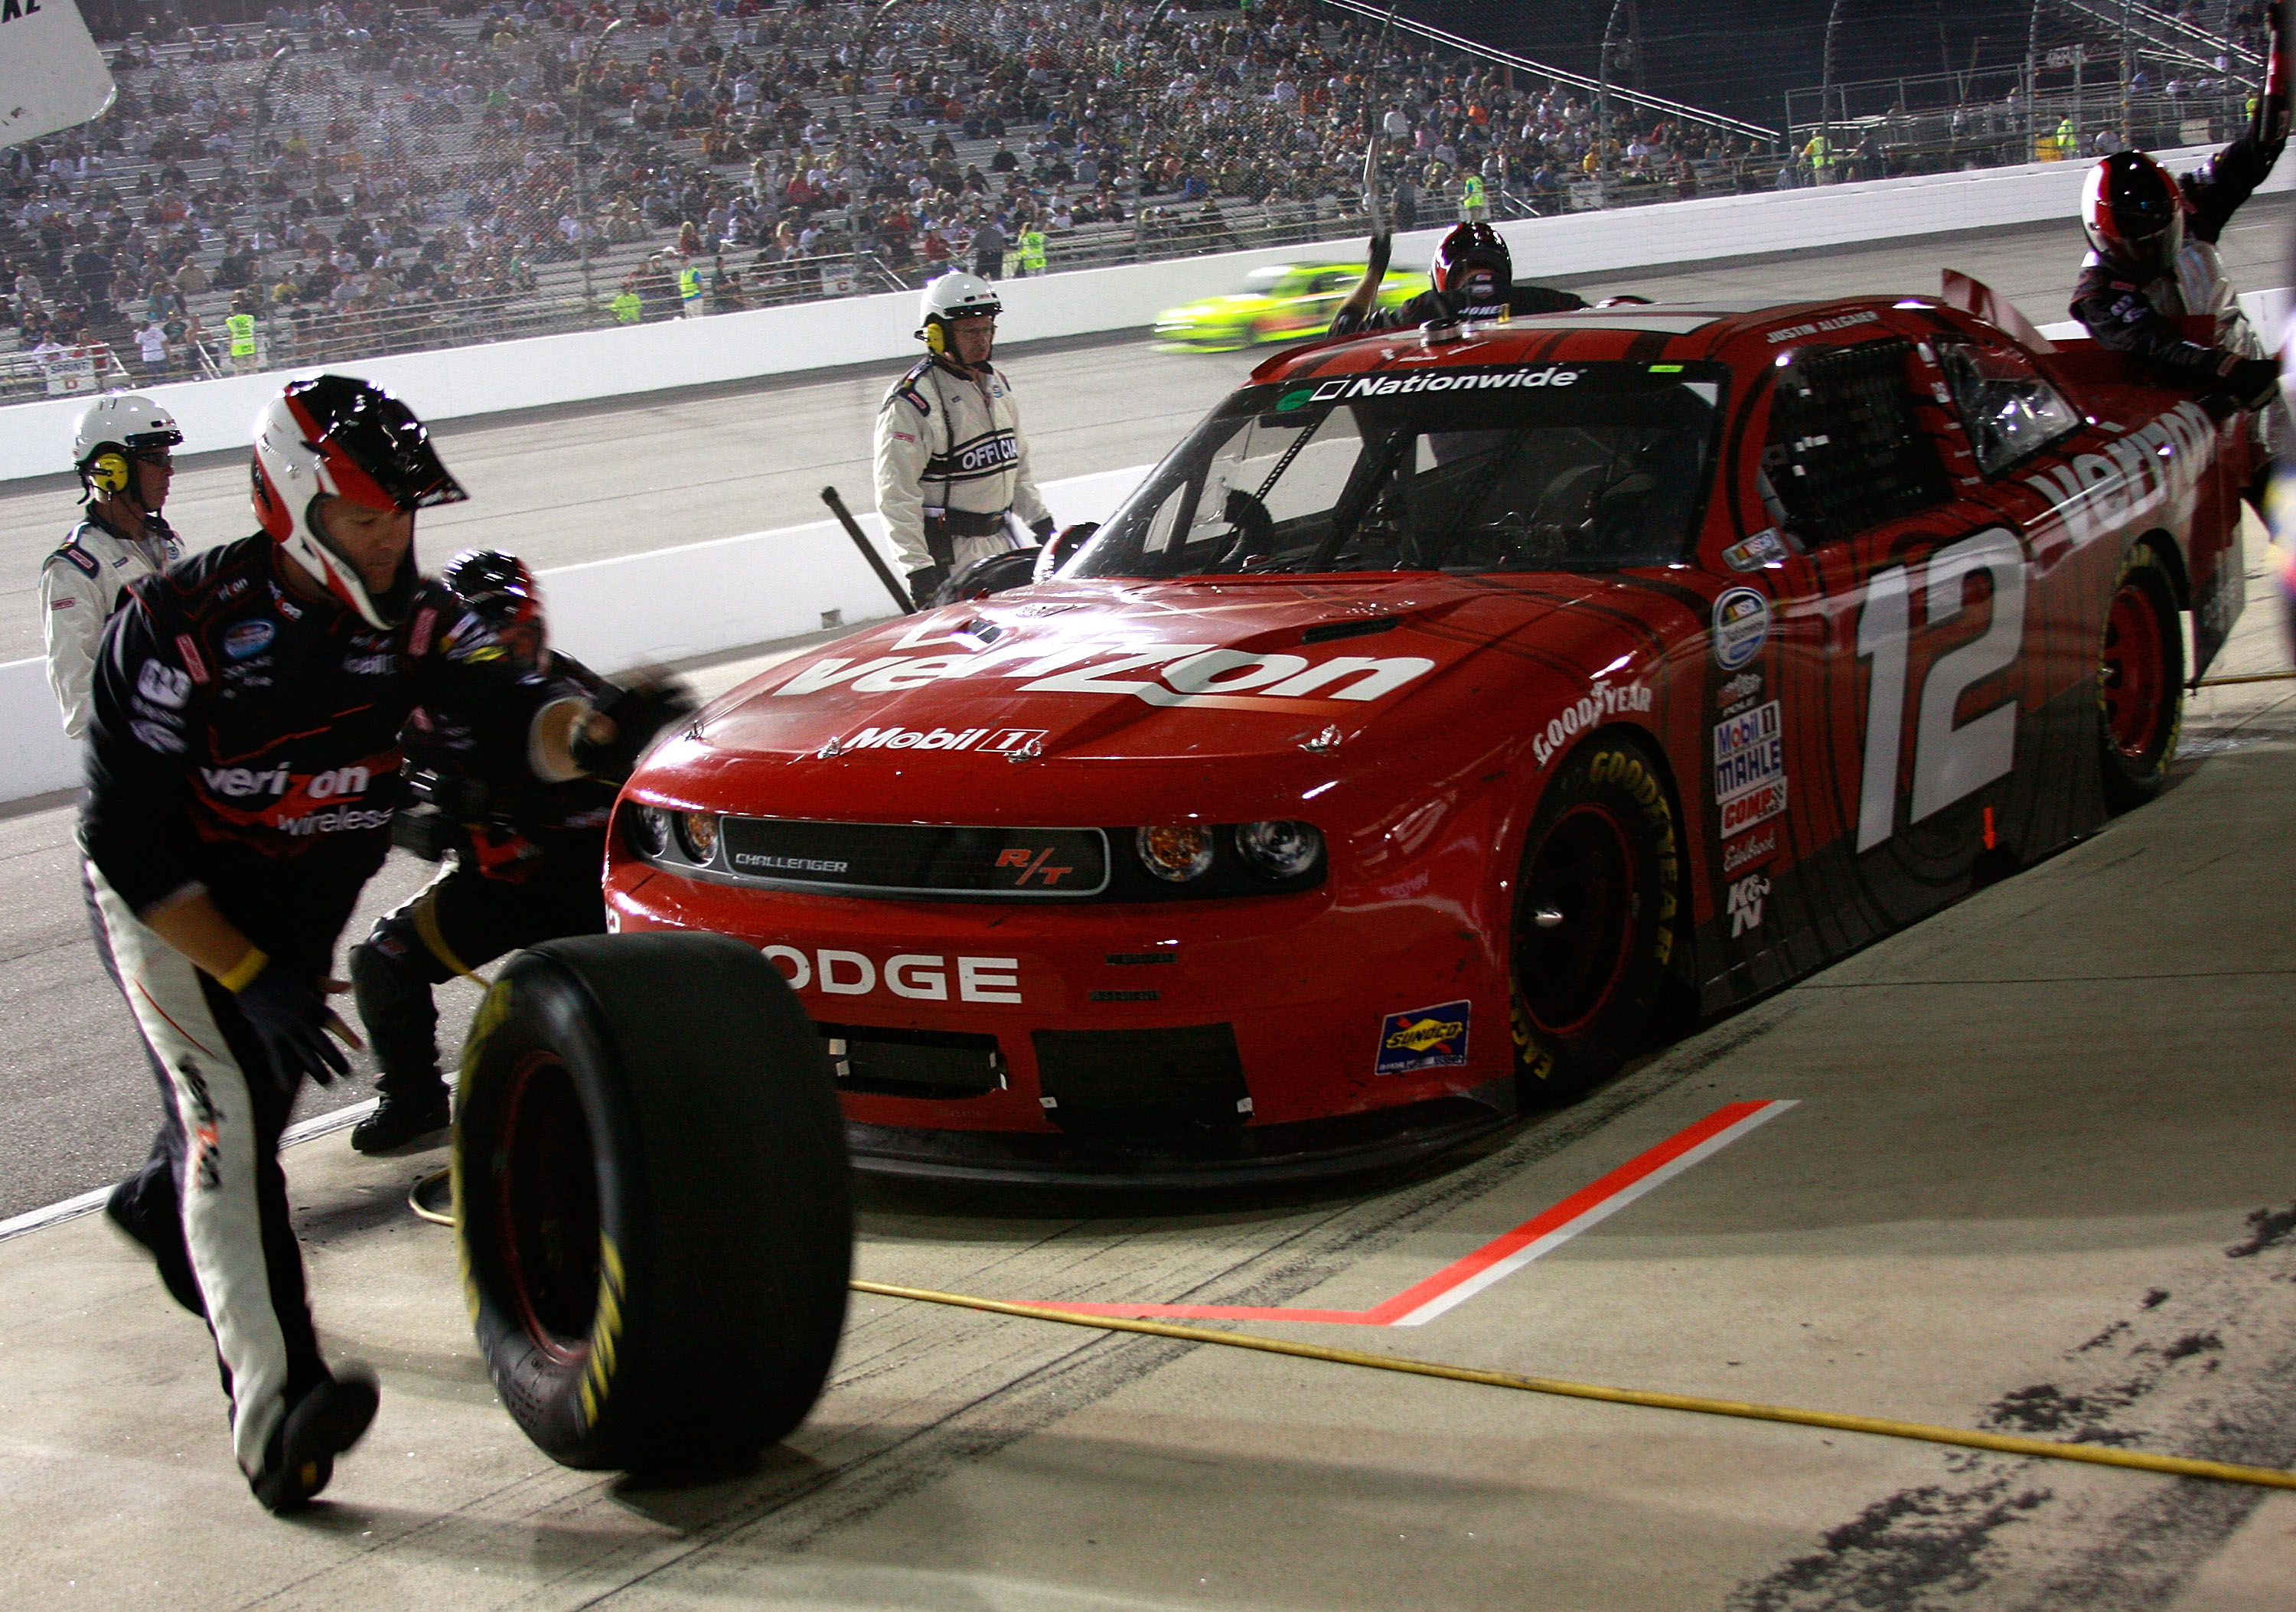 RICHMOND, VA - SEPTEMBER 10:  Justin Allgaier, driver of the #12 Verizon Wireless Dodge, pits during the NASCAR Nationwide Series Virginia 529 College Savings 250 at Richmond International Raceway on September 10, 2010 in Richmond, Virginia.  (Photo by Ch